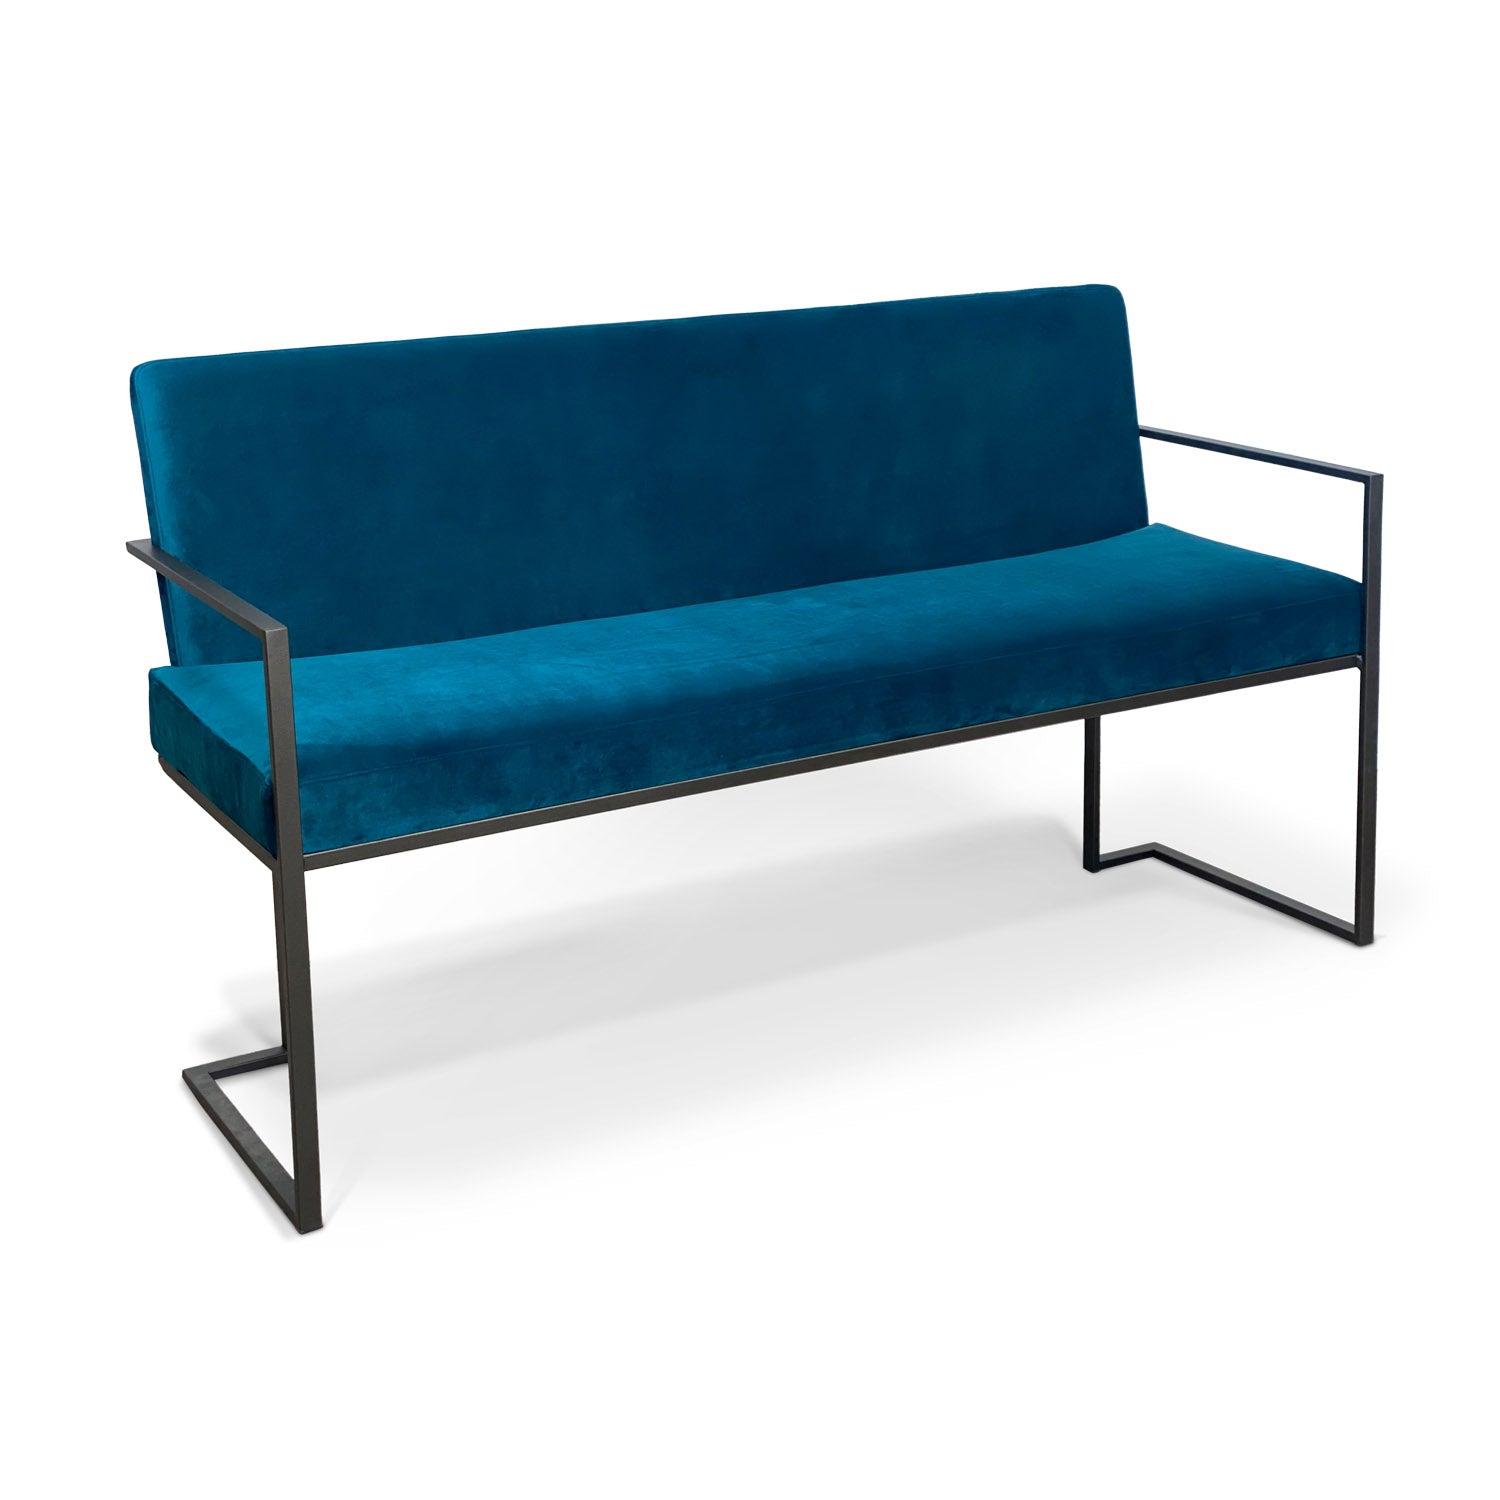 Wesley Allen Marzan Bench featured in a Pebblestone PBS Finish and Upholstered with Premium Royal Teal Fabric.